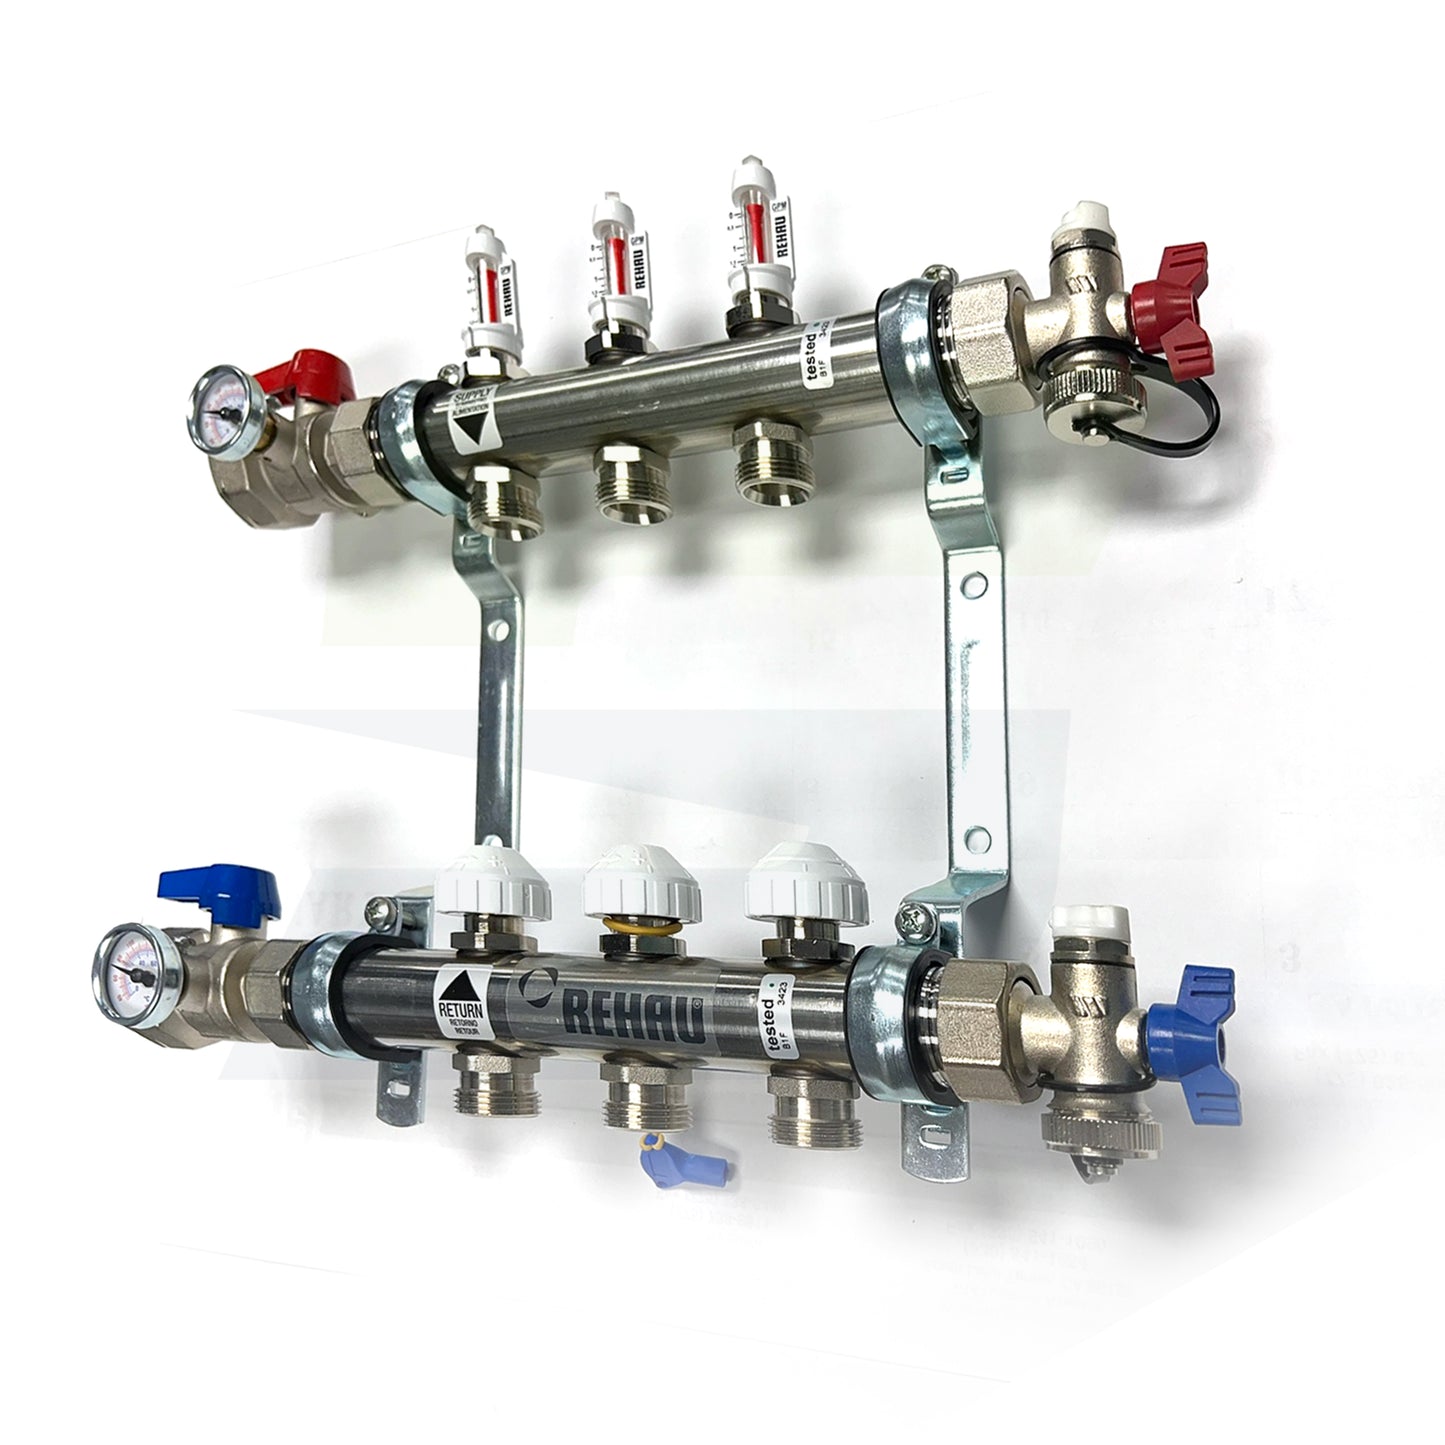 381103-001 - PRO-BALANCE 1" Stainless Steel Manifold With Gauges - 3 Outlet